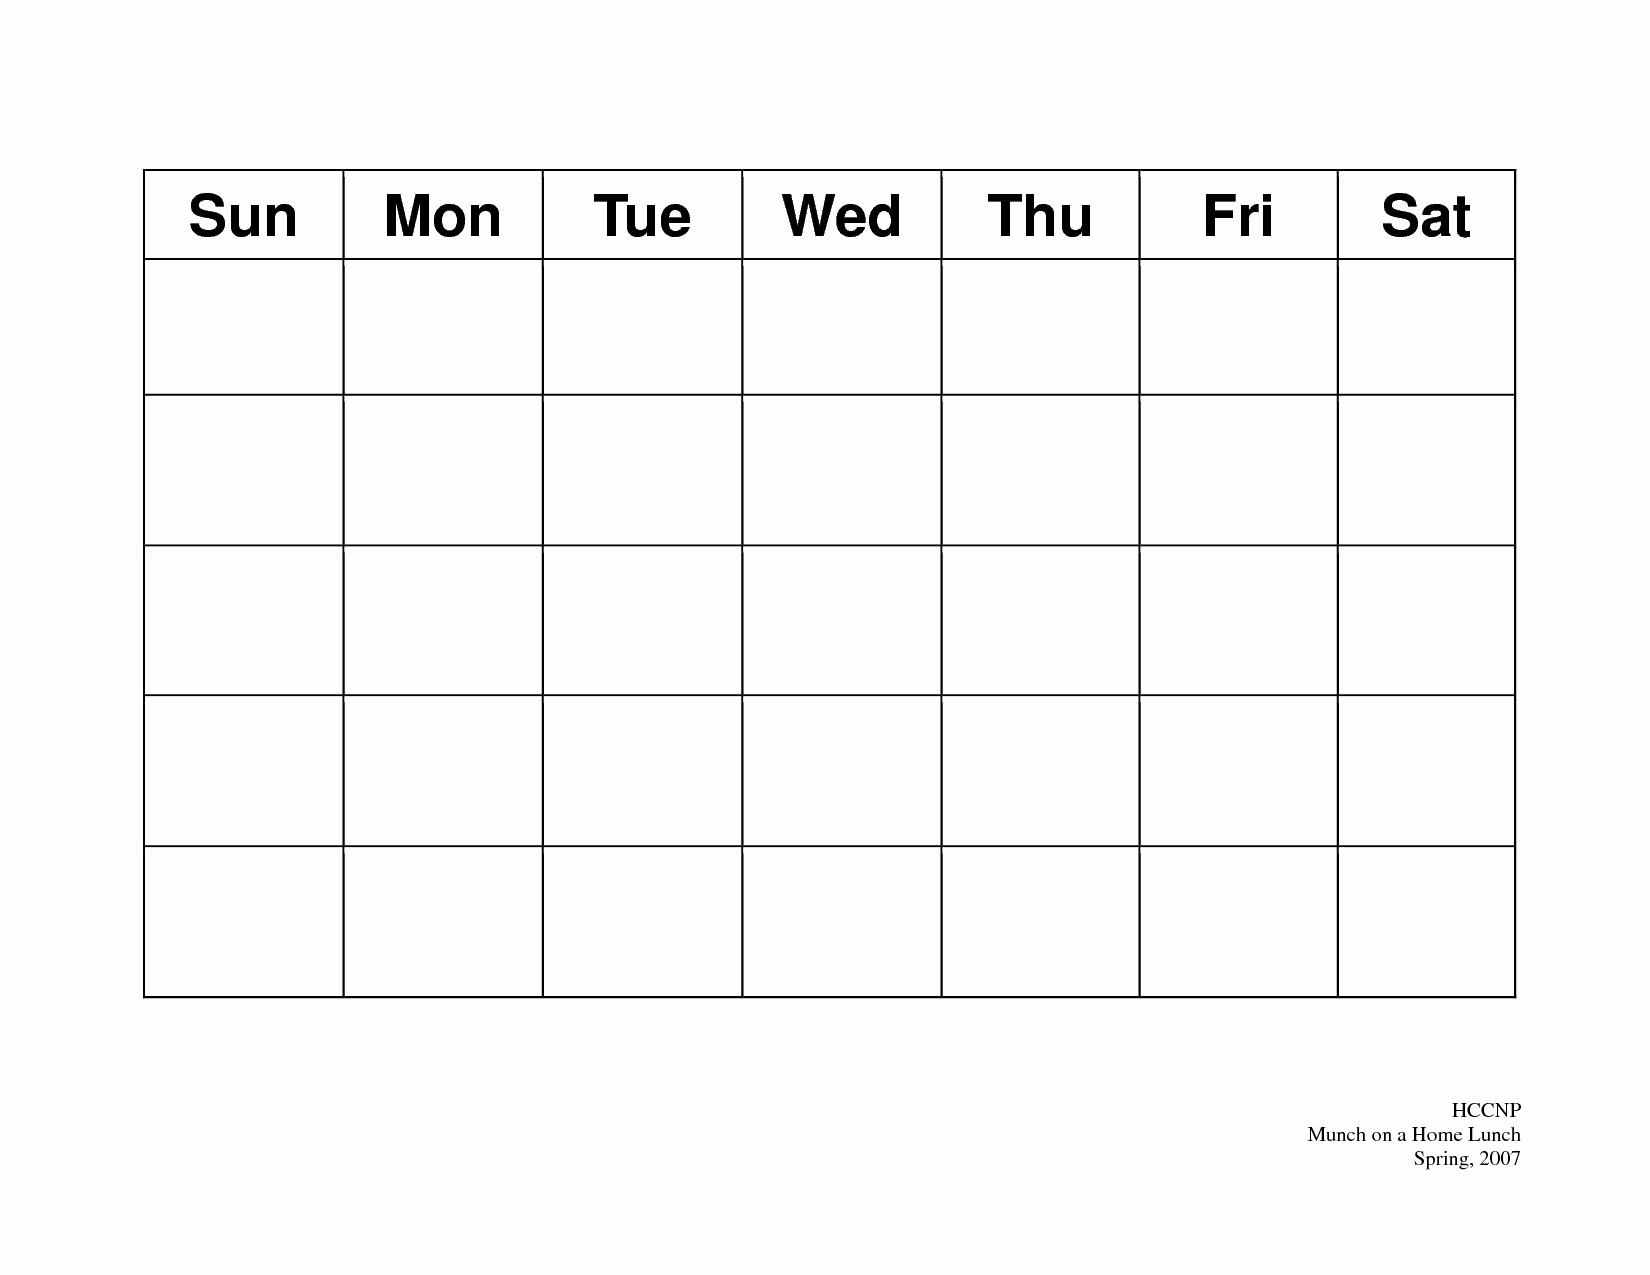 Free Printable 5 Day Monthly Calendar – Insightsonline intended for Free Printable 5 Day Calendar